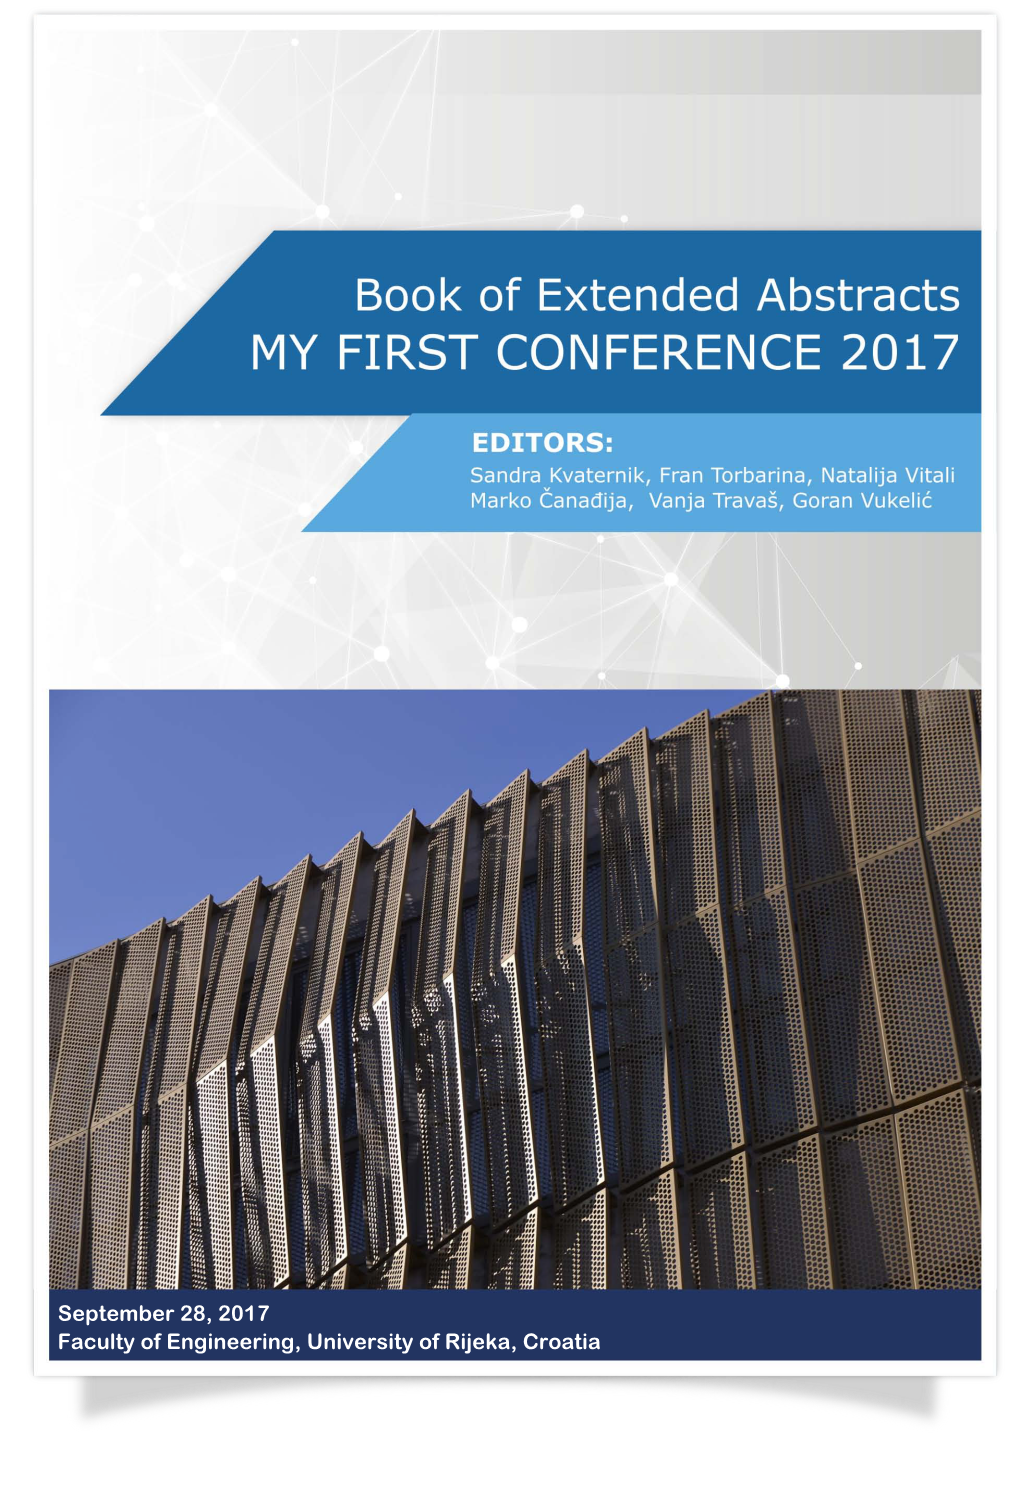 Book of Extended Abstracts – My First Conference 2017